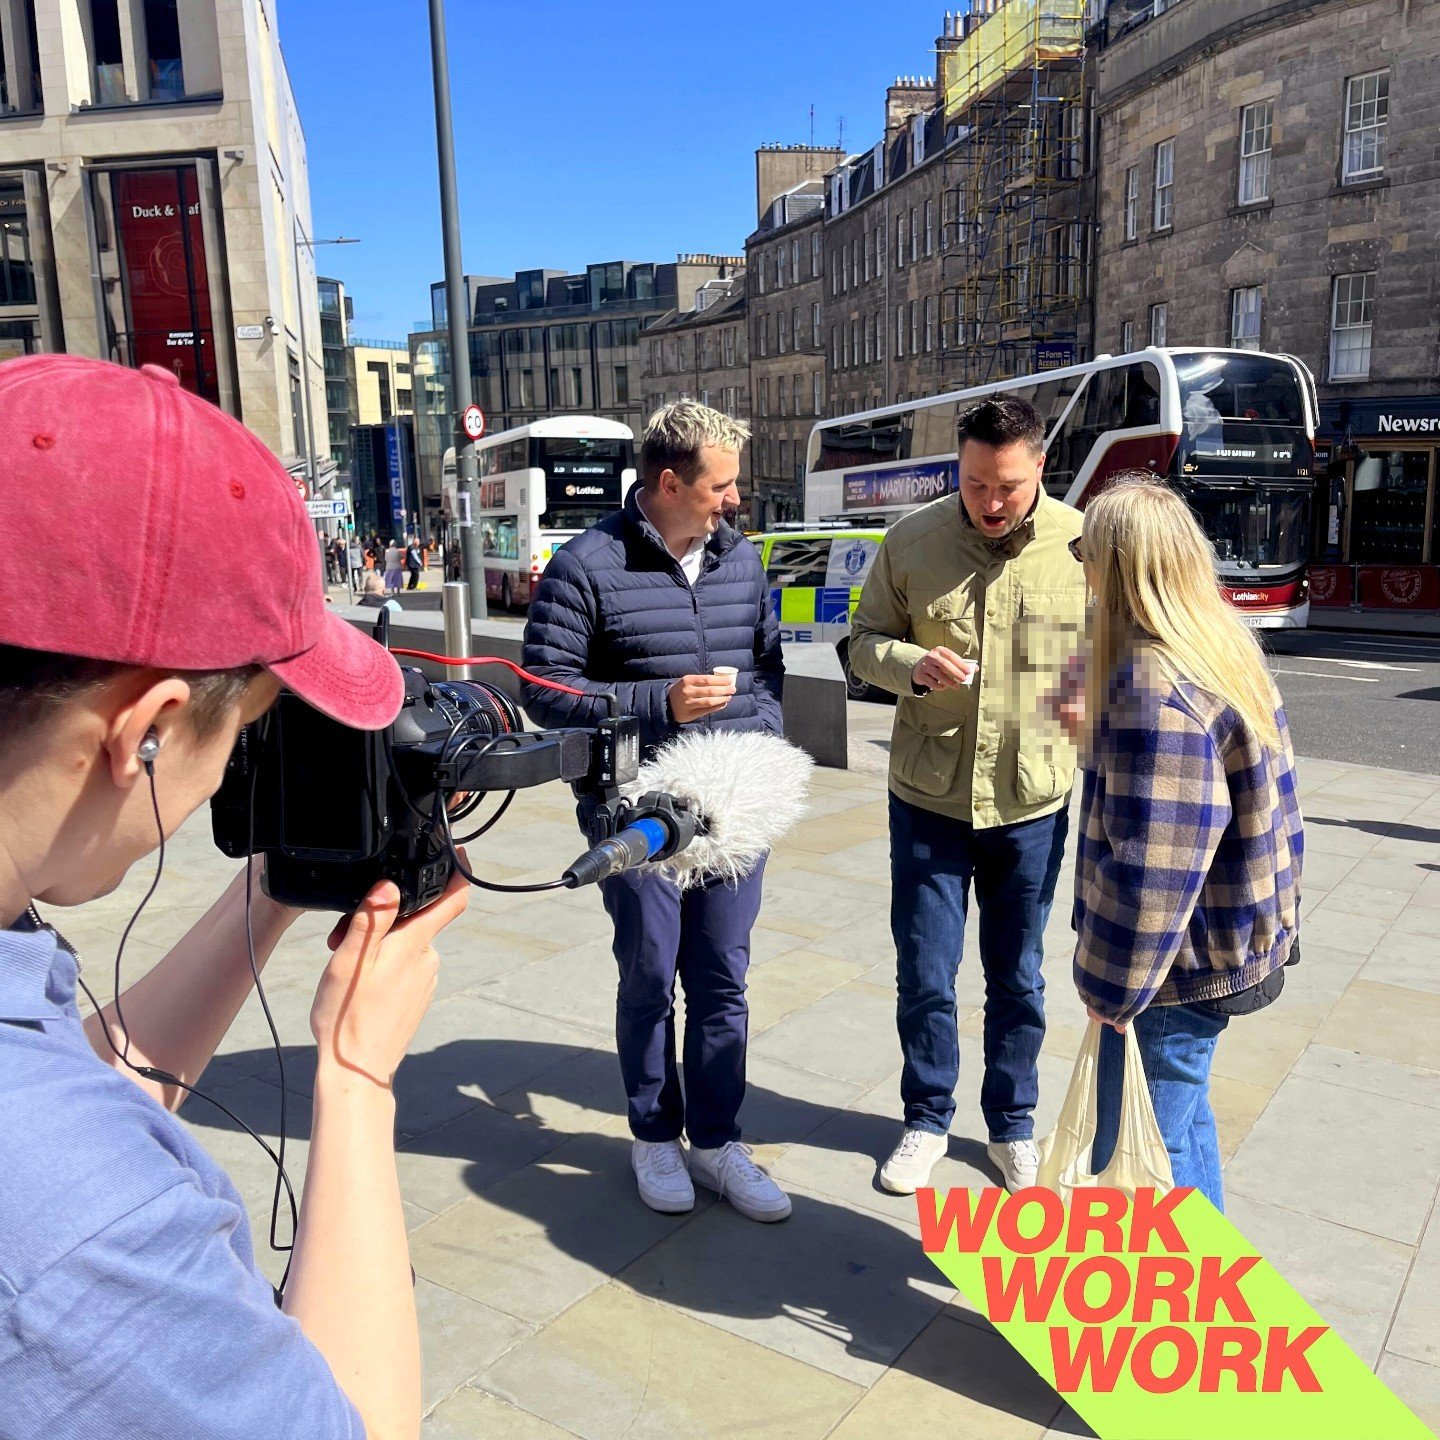 Last week, we hit the streets of Edinburgh to help support an exciting client product launch. More coming soon 👀

#SunshineAgency #SocialMediaAgency #PublicInterviews #Voxpops #Edinburgh